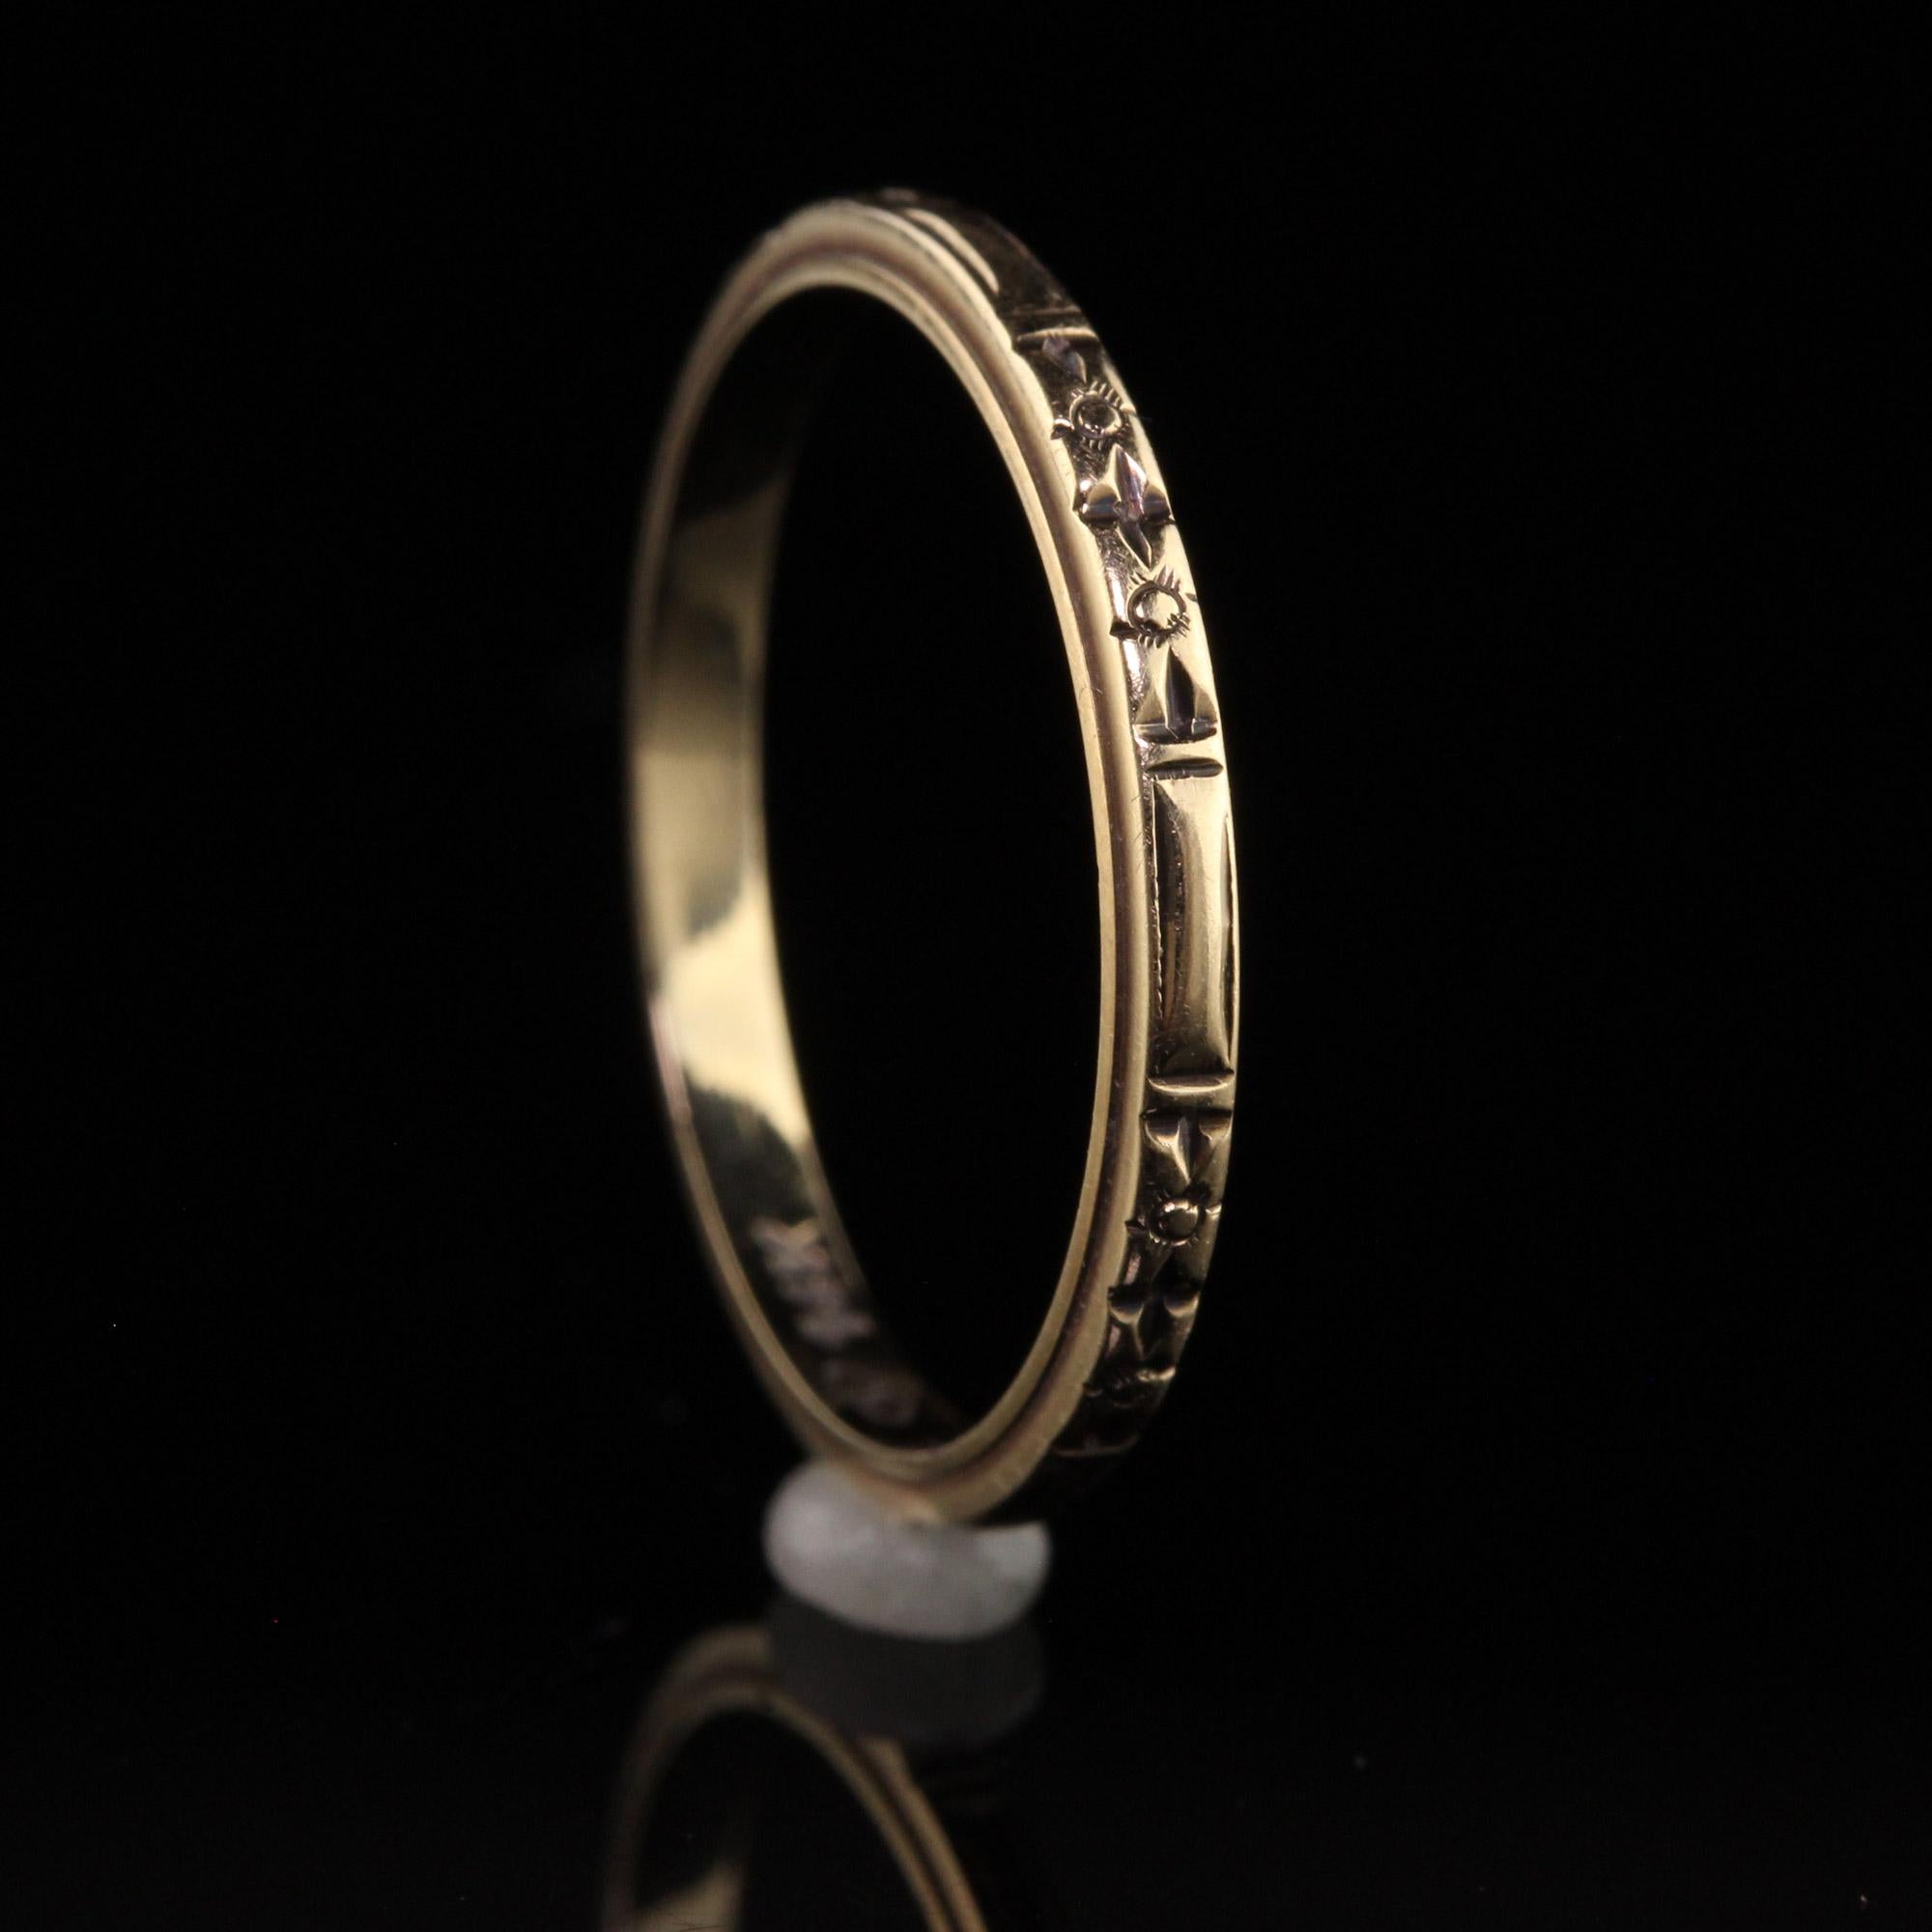 Antique Art Deco 14K Yellow Gold Engraved Wedding Band - Size 7 1